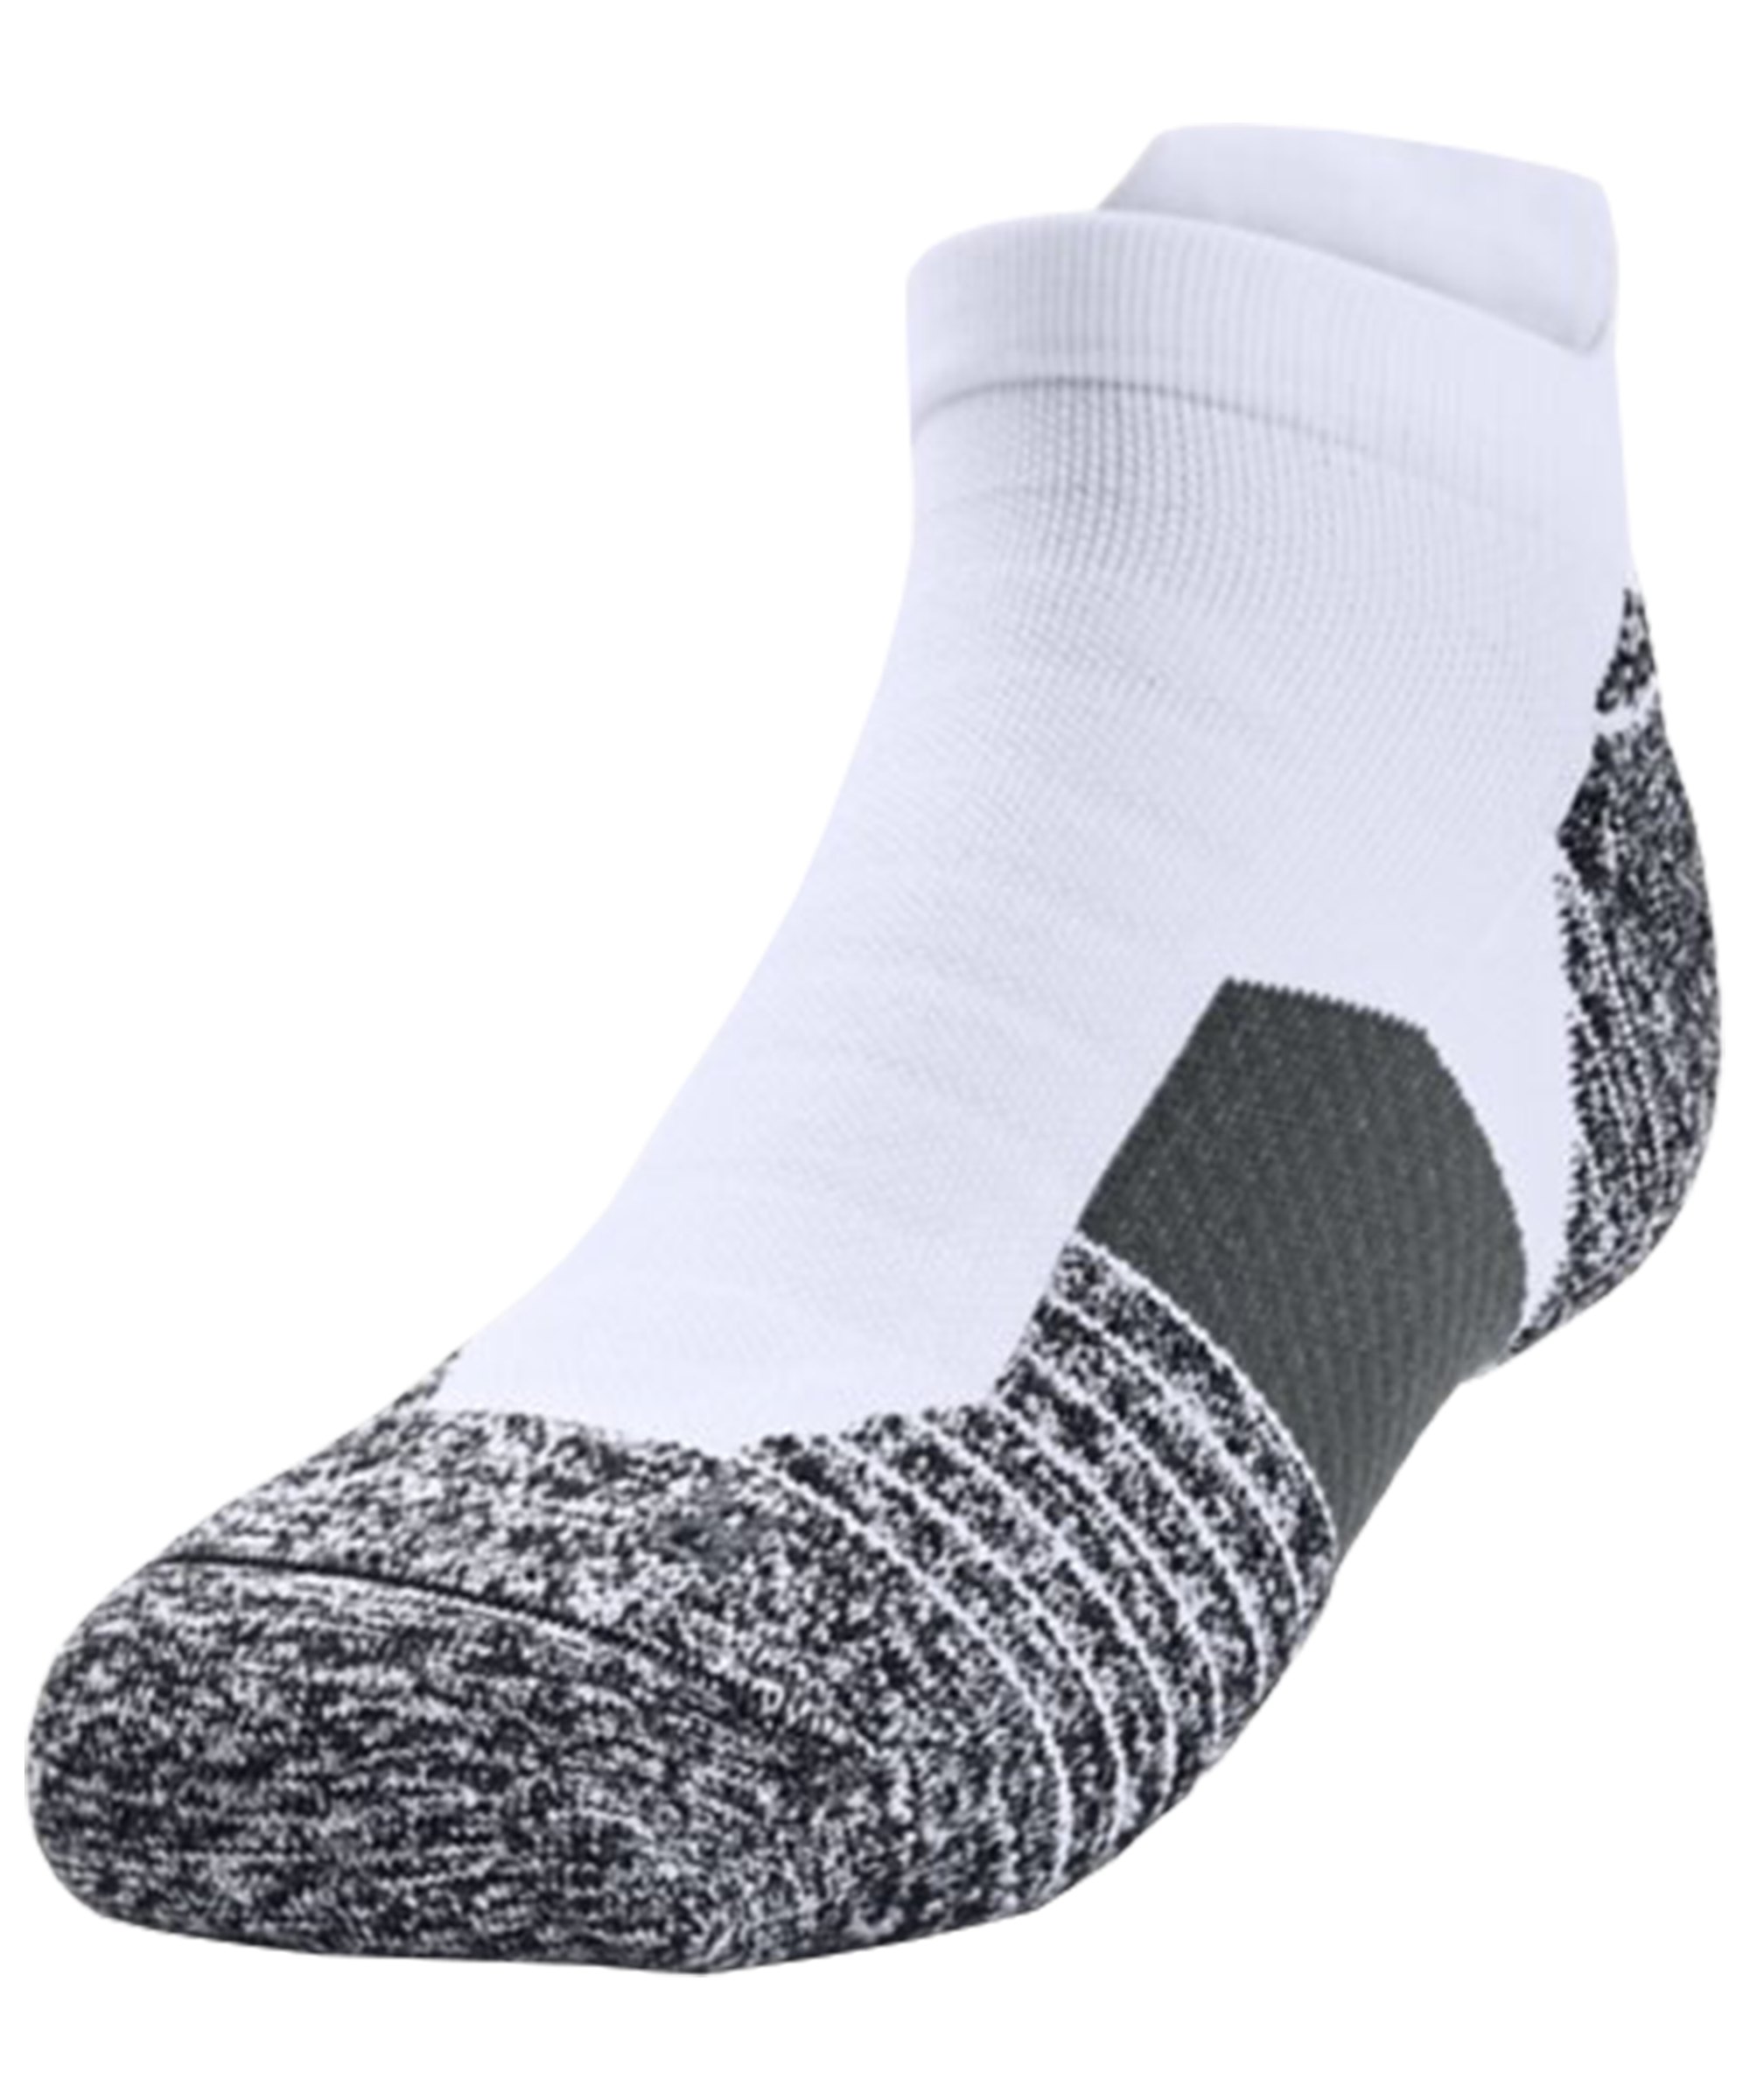 Under Armour Charged Cushion No Show Socken F102 - weiss